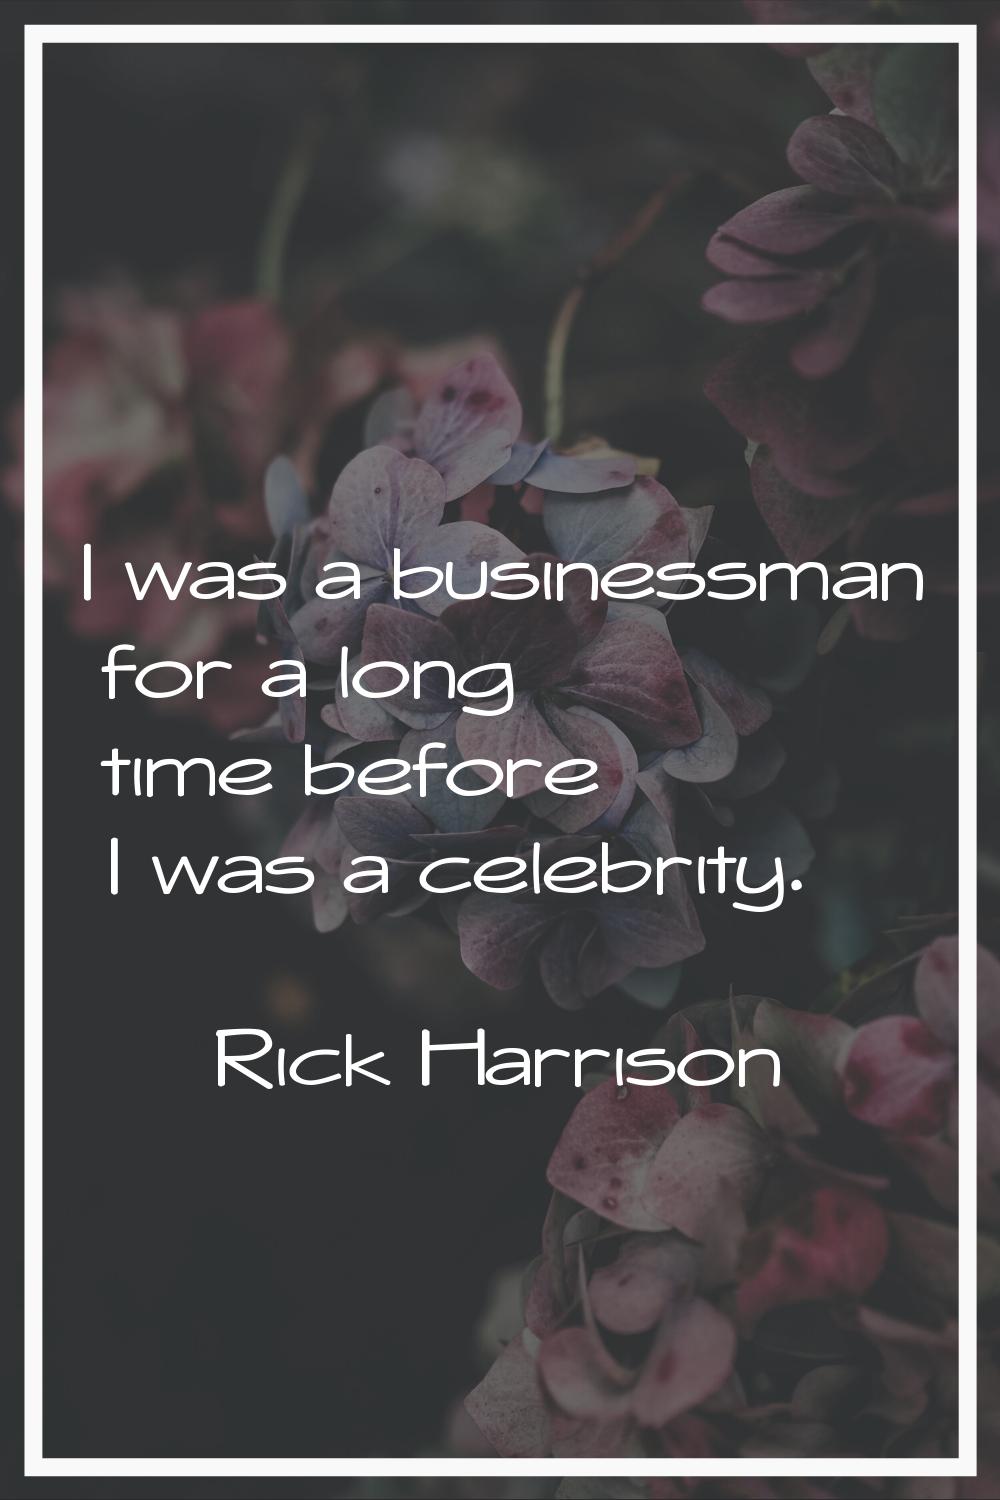 I was a businessman for a long time before I was a celebrity.